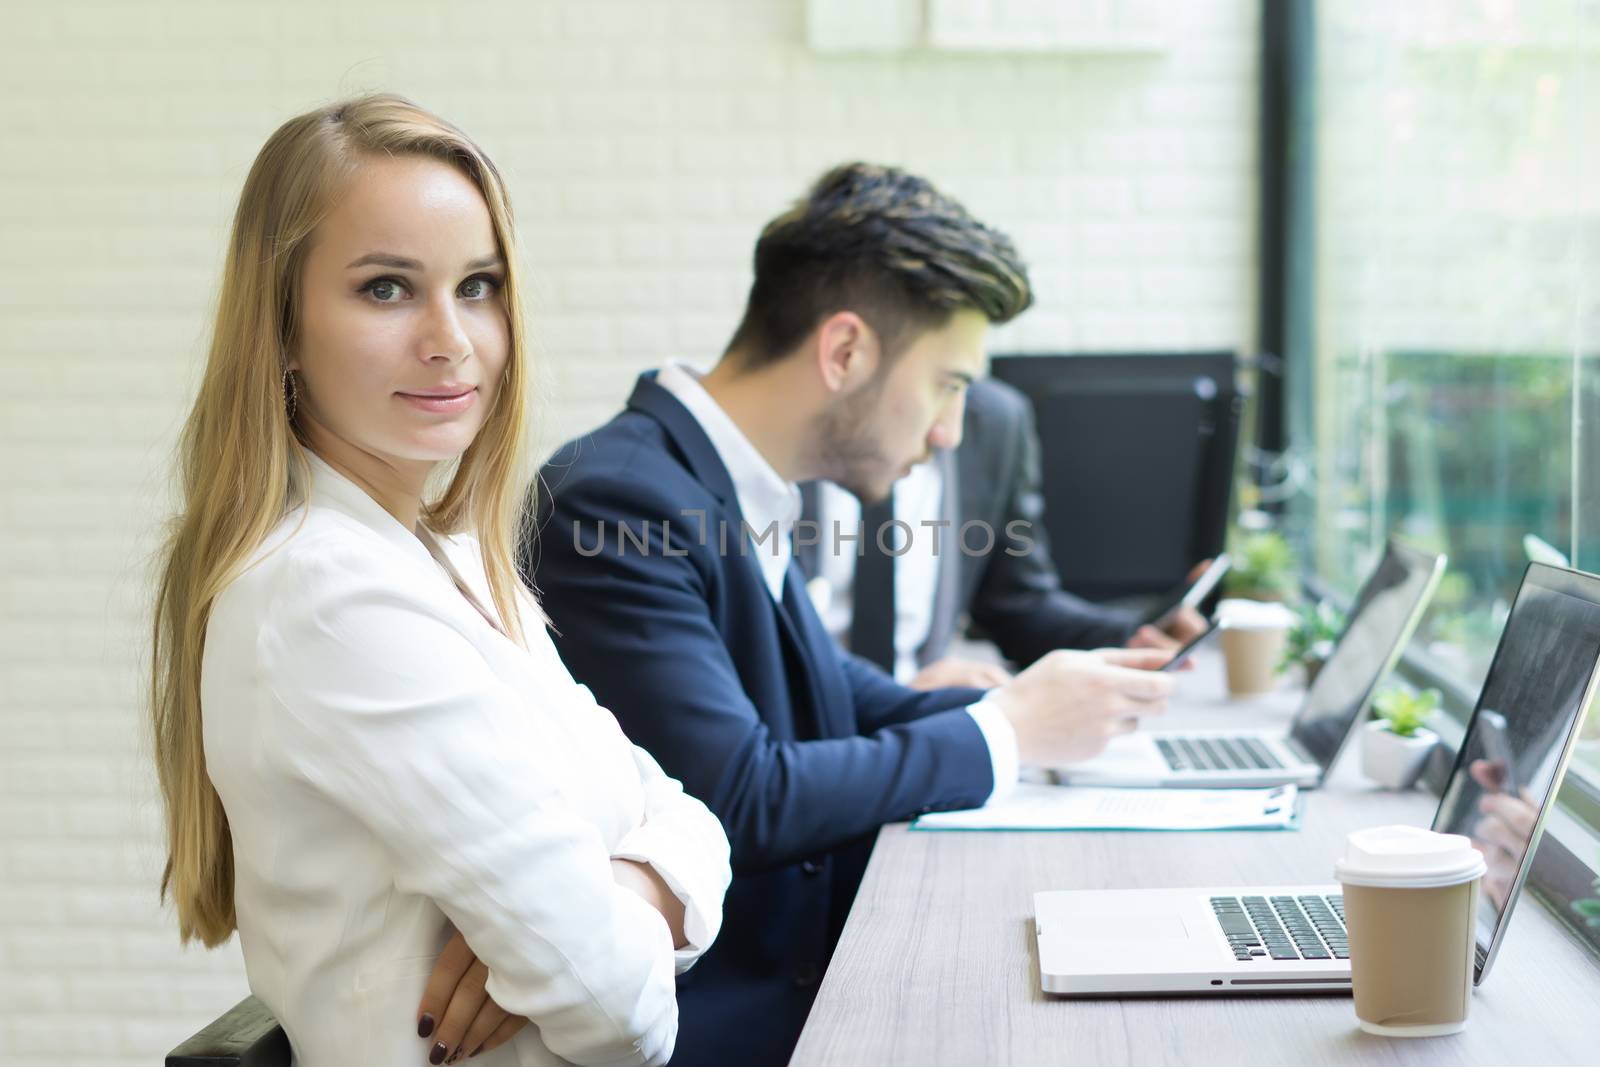 Businesswoman using laptop to work while coworker interacting in the background in the office